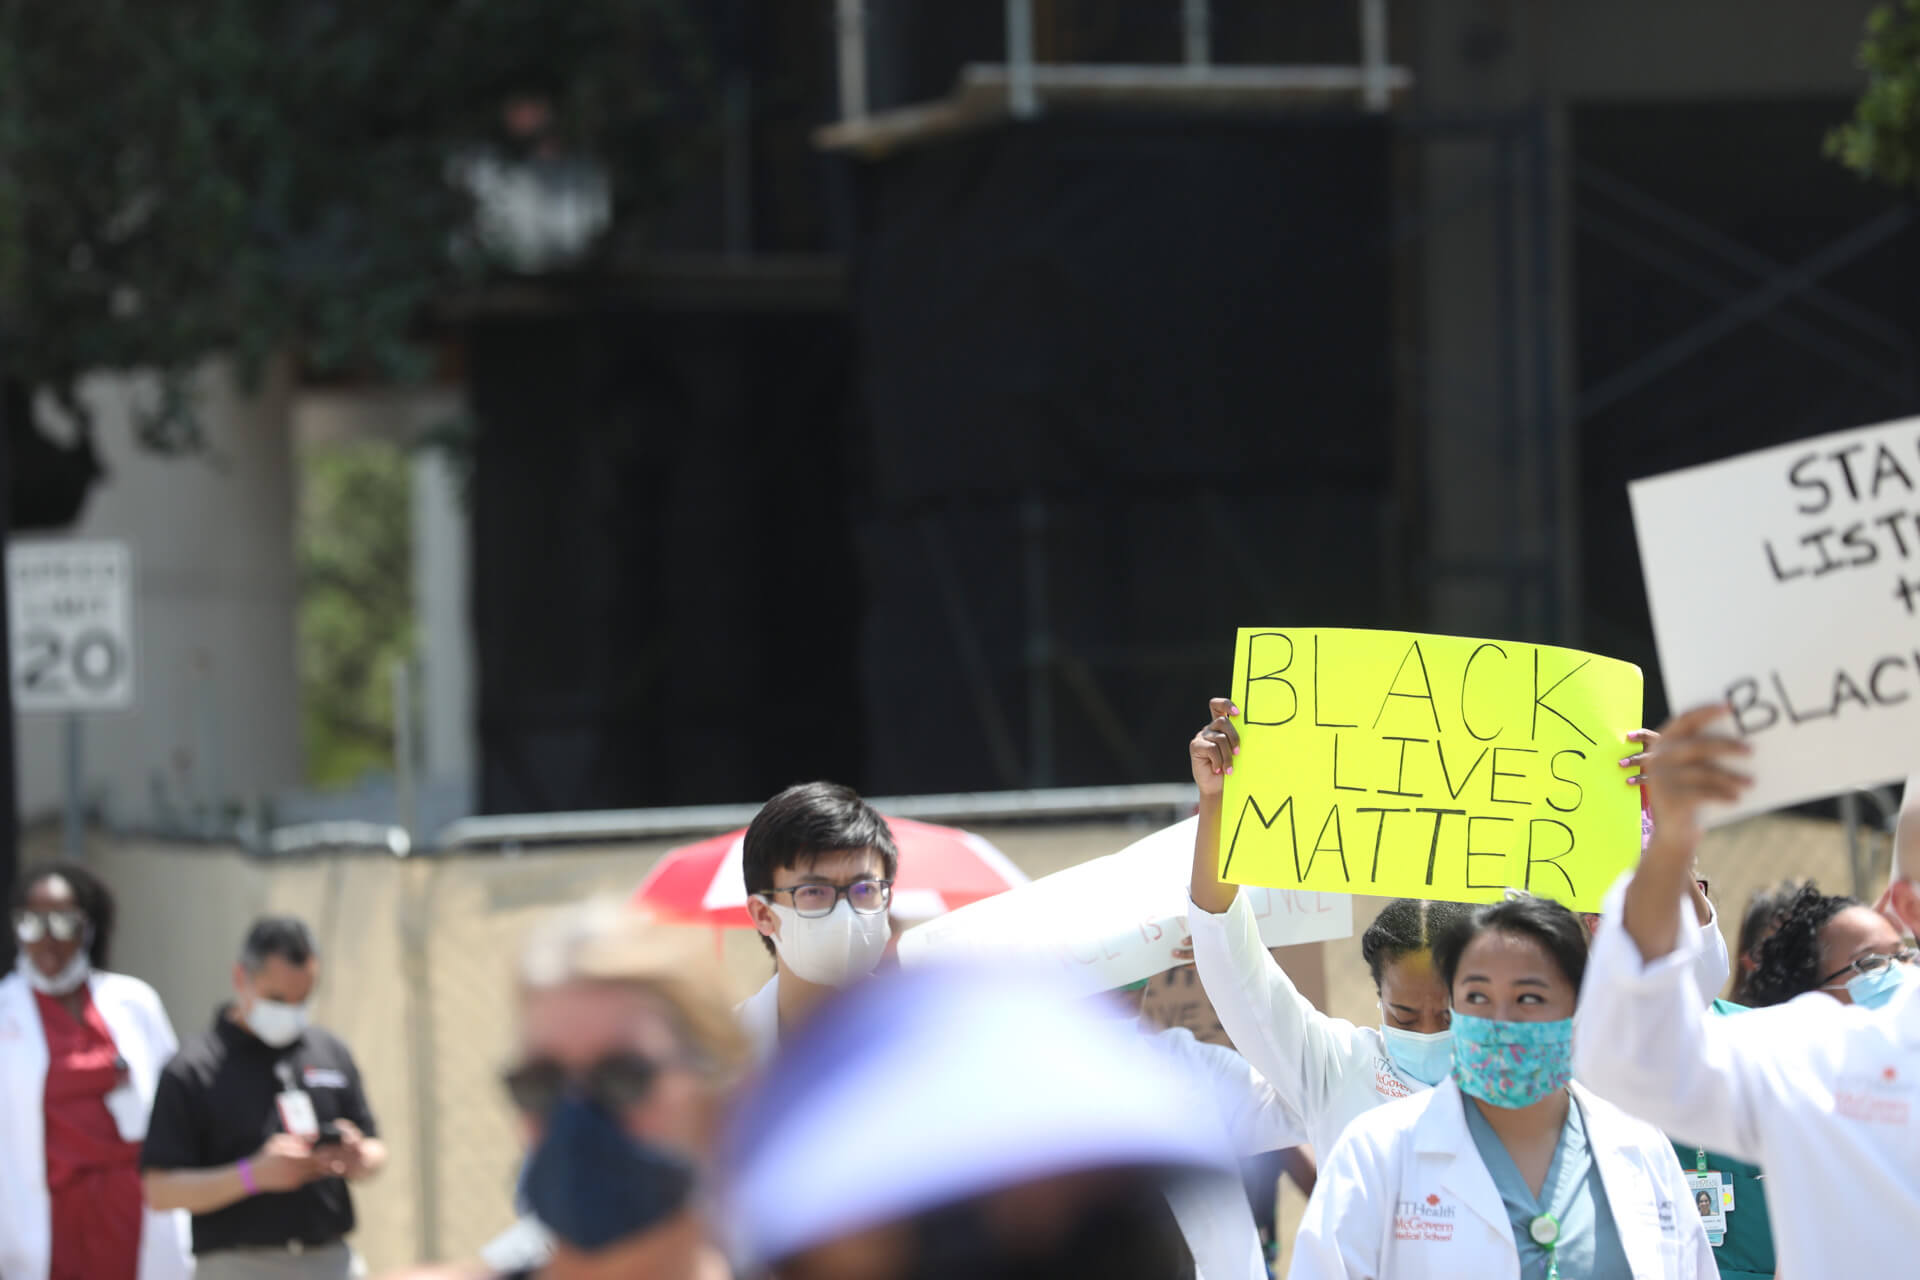 Texas Medical Center health professionals participate in a walking vigil for black lives on Tuesday, June 9, 2020.